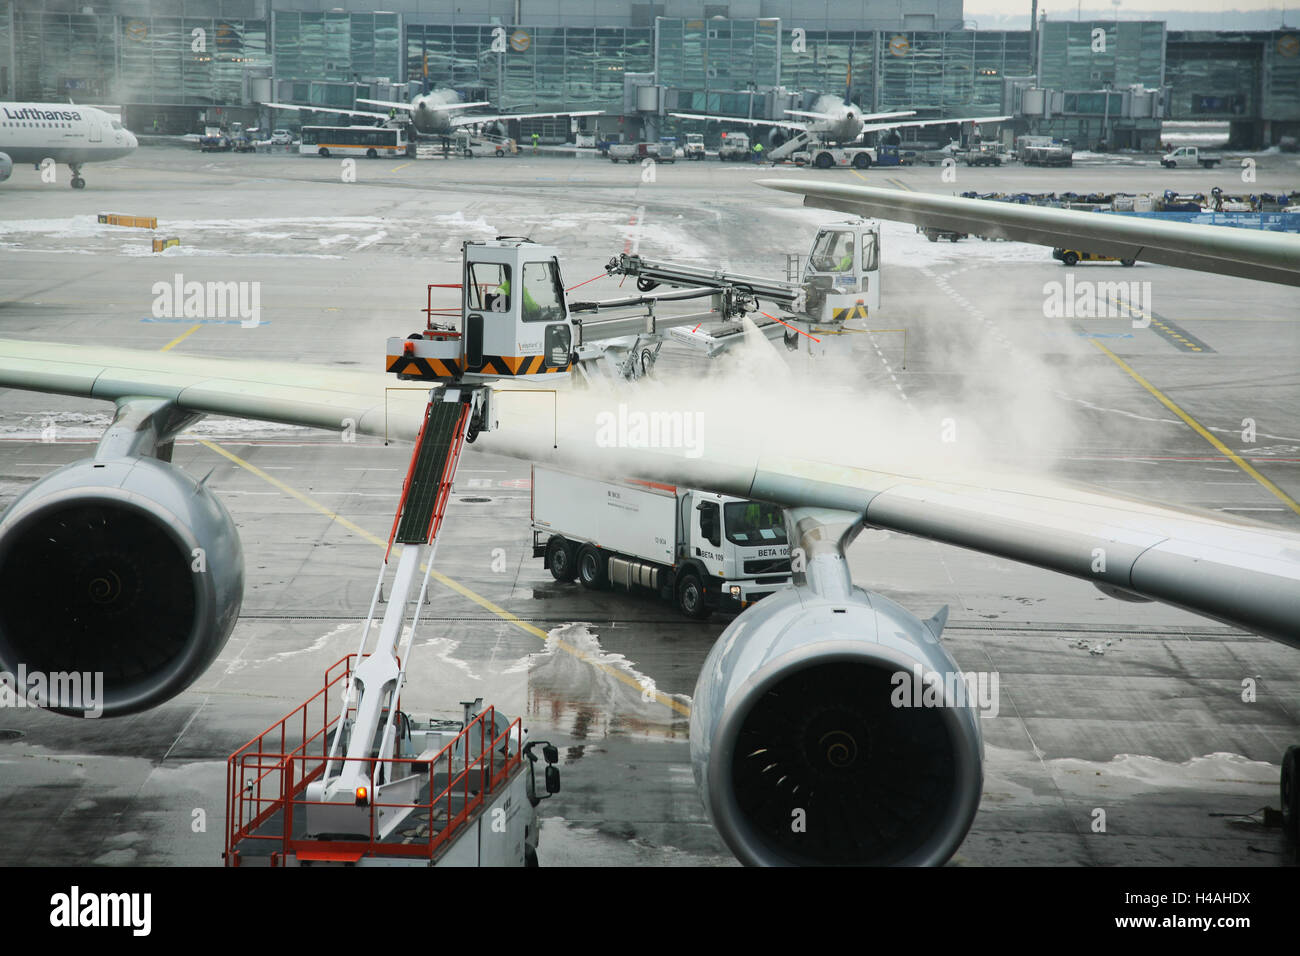 Airplane defrosting at the gate in the airport Frankfurt Stock Photo